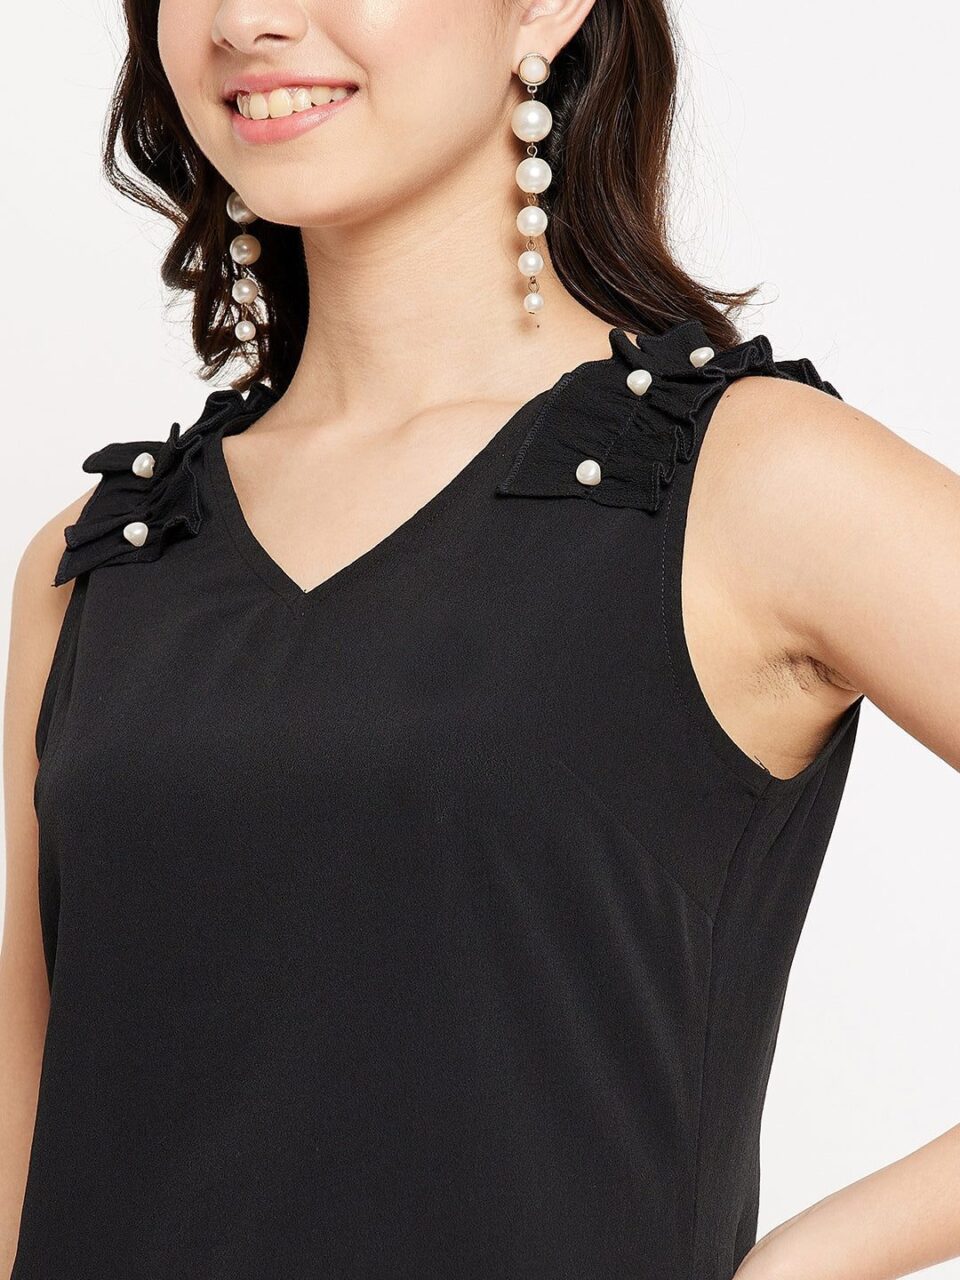 V Neckline Top With Frill Beads Detailing